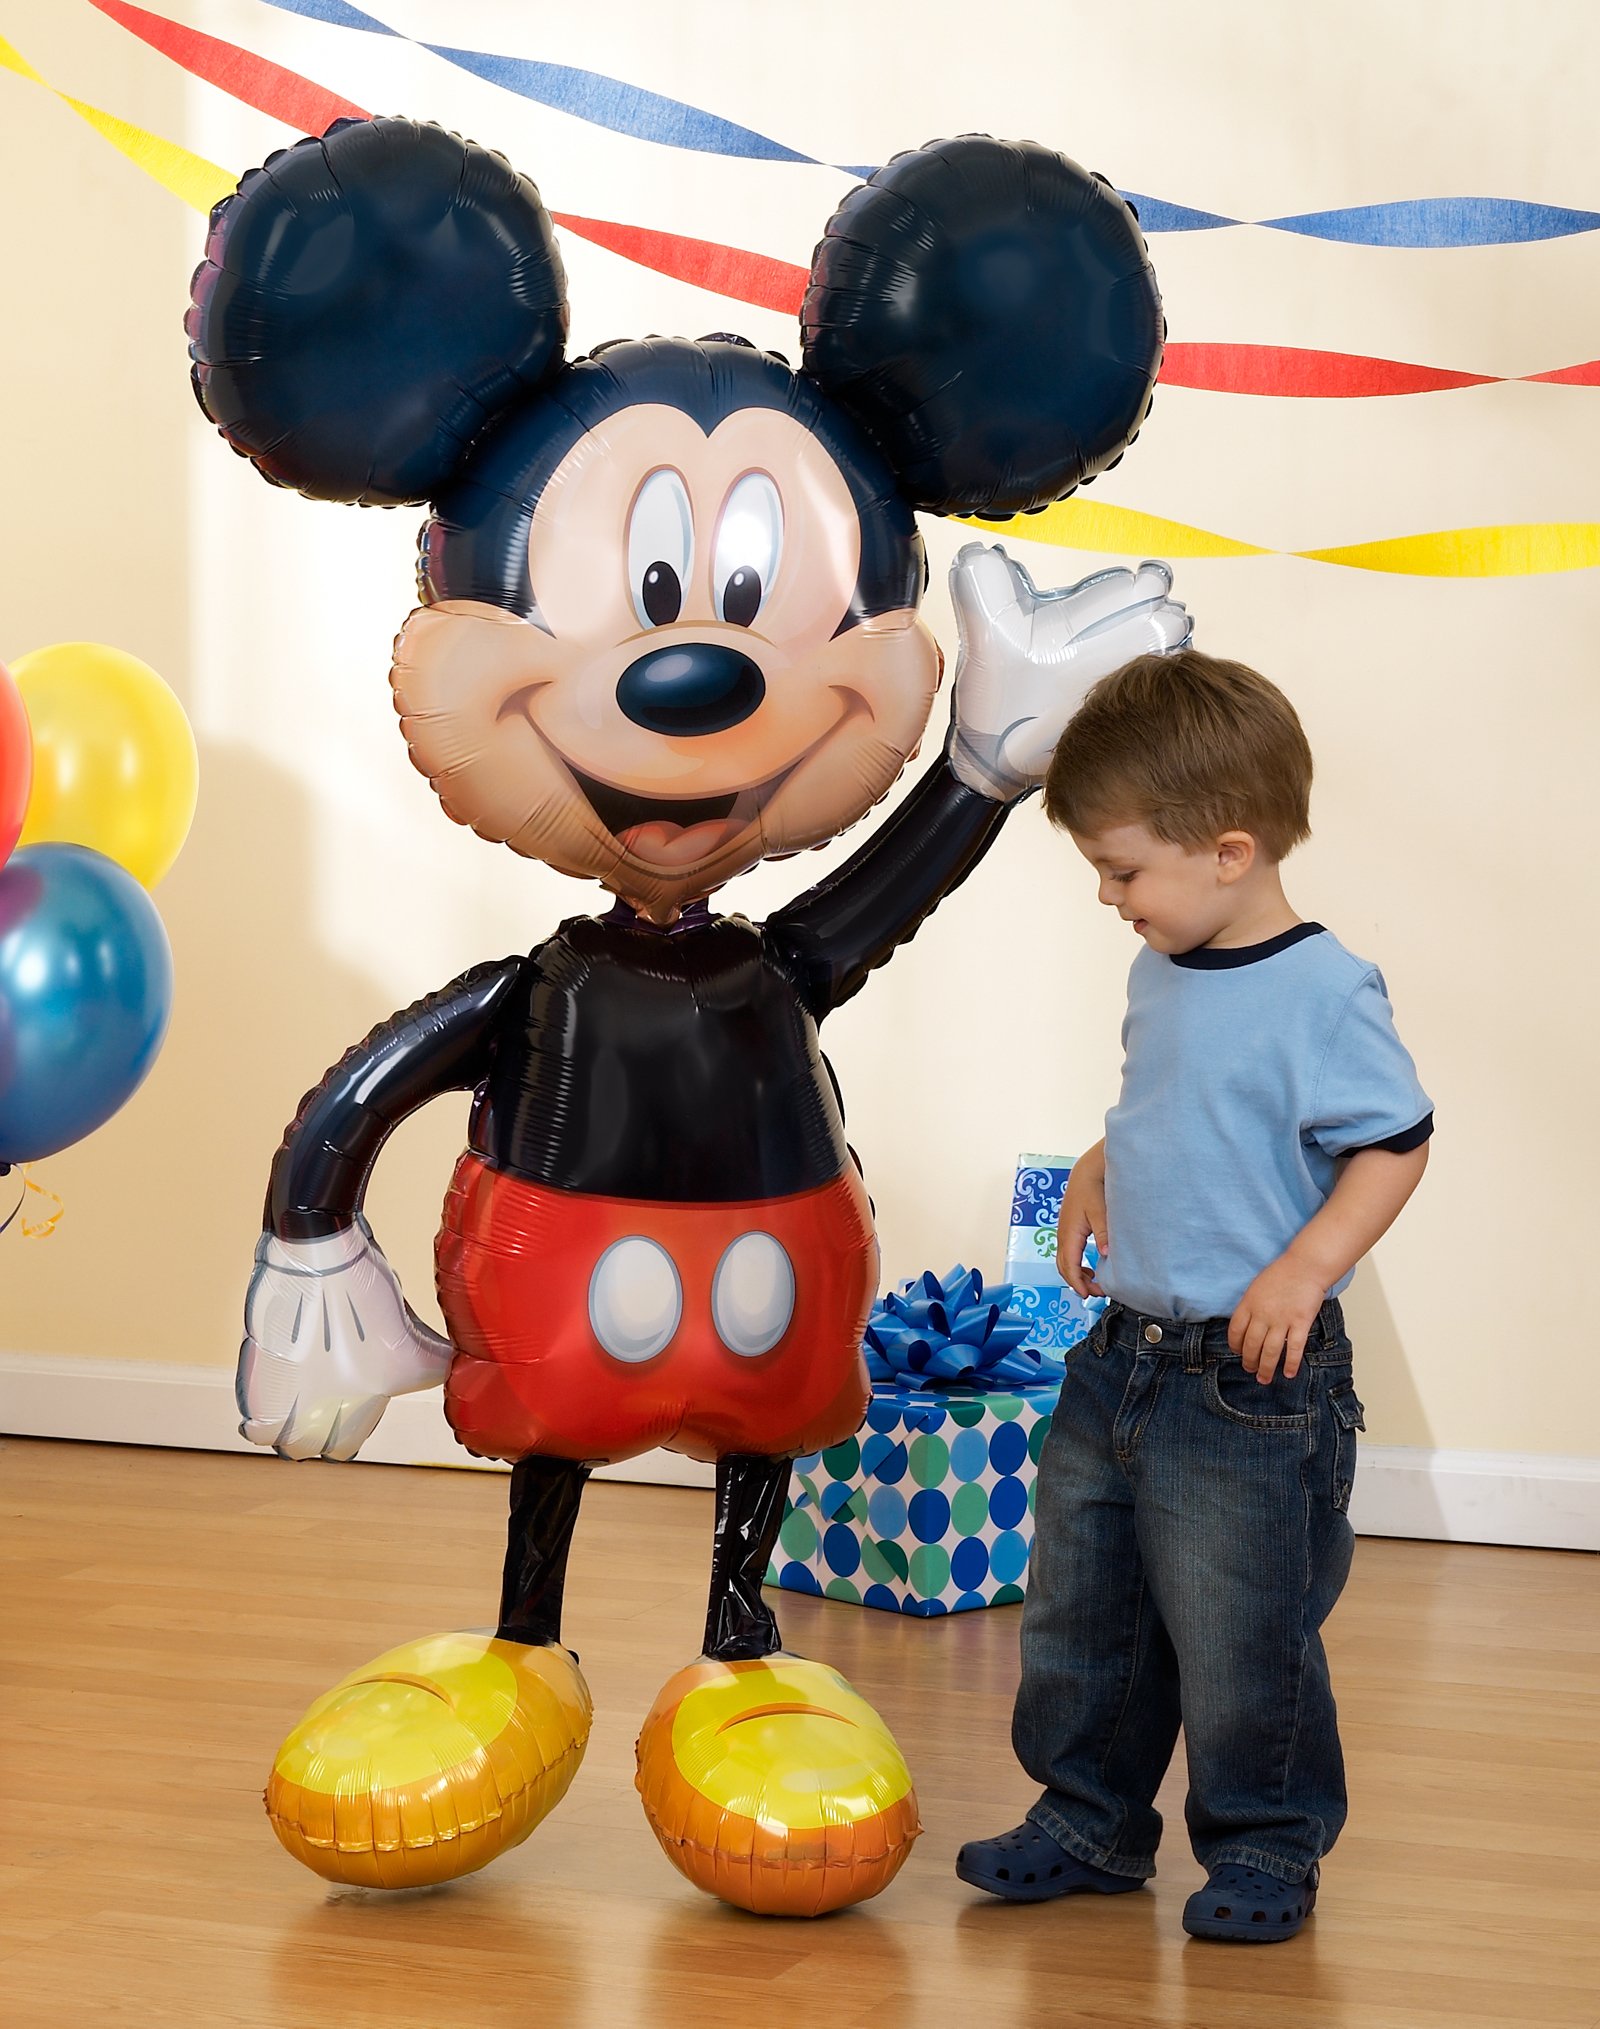 Mickey Mouse Airwalker 52" Jumbo Foil Balloon - Click Image to Close